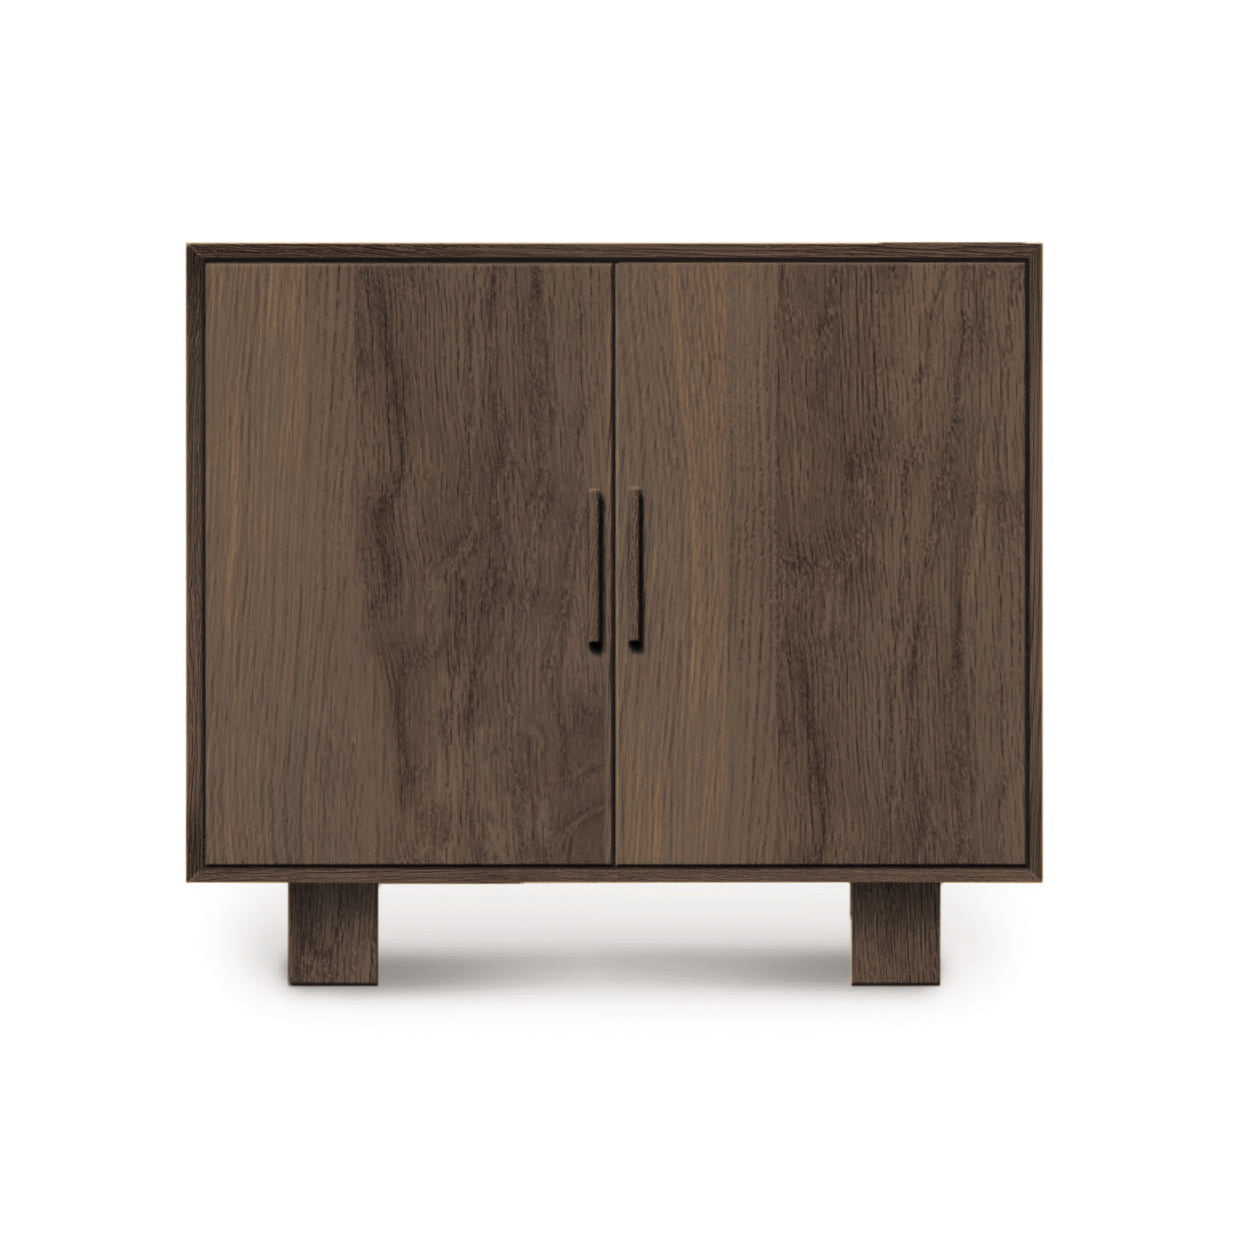 A Iso 2-Door Buffet dining storage cabinet, crafted from solid oak hardwood by Copeland Furniture, stands upright against a plain white background.